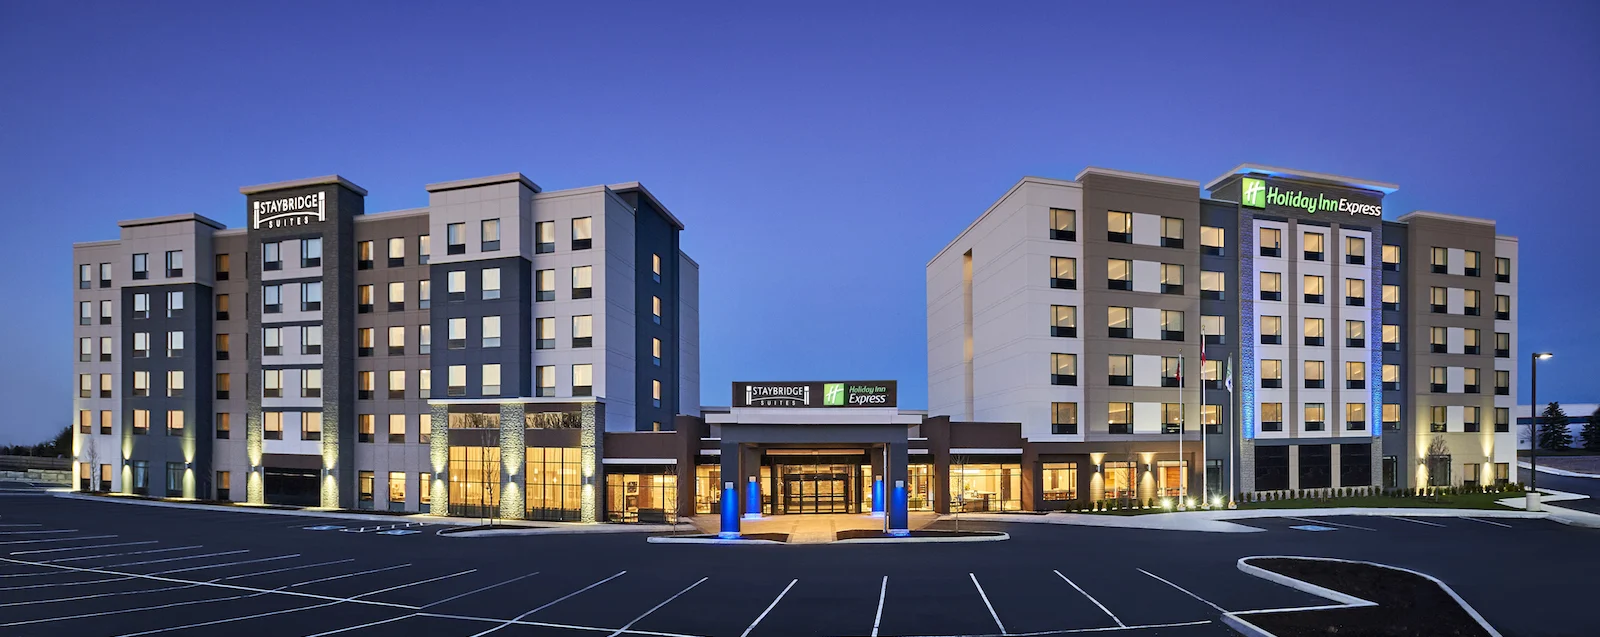 Holiday Inn Express and Staybridge Suites